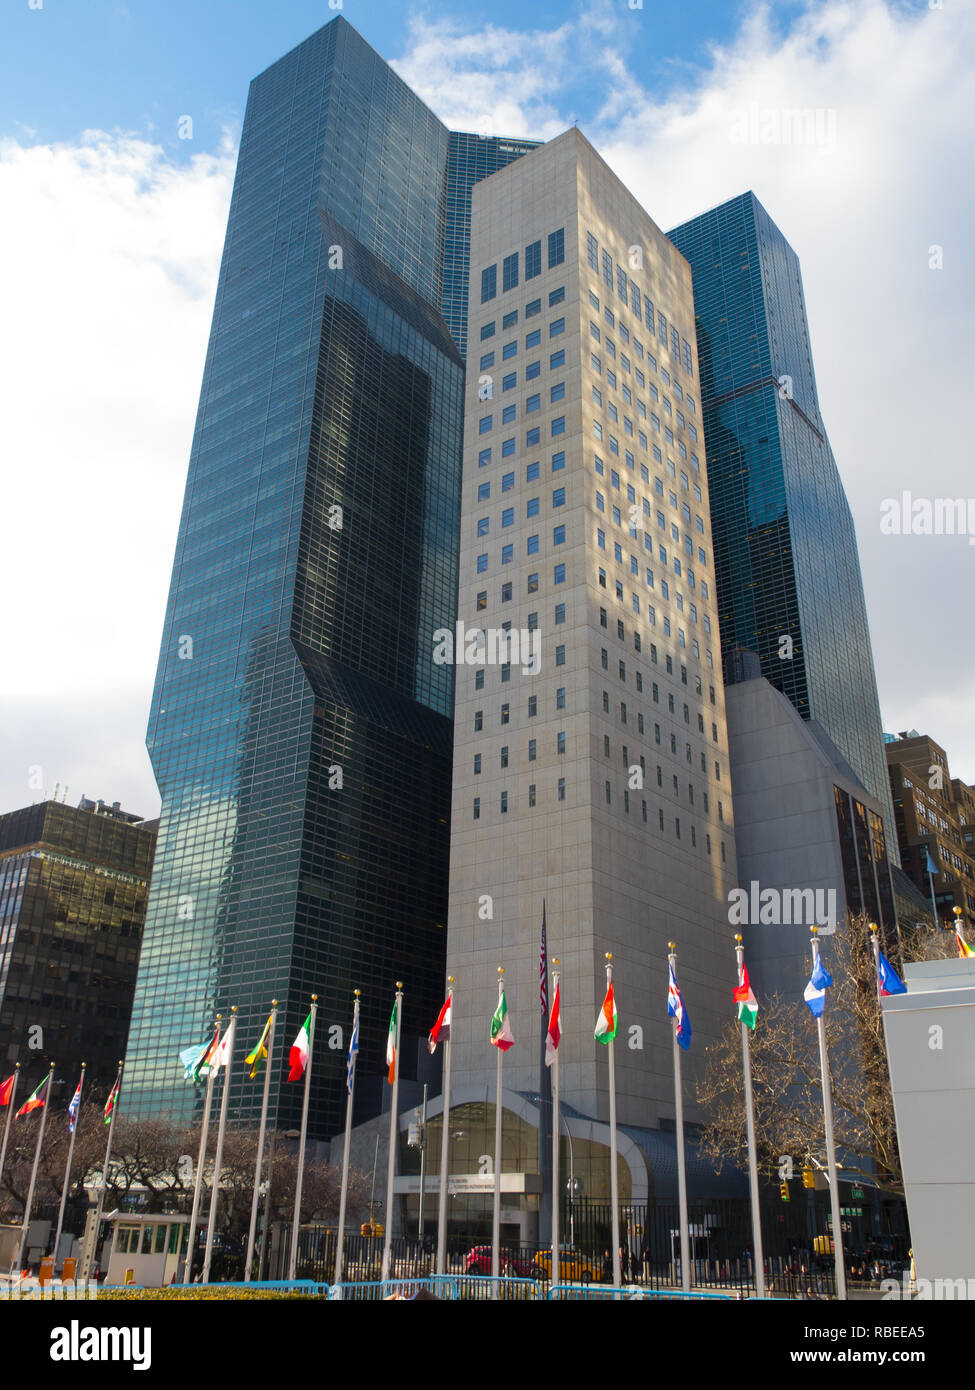 The U.S. Mission to the United Nations, New York City Stock Photo